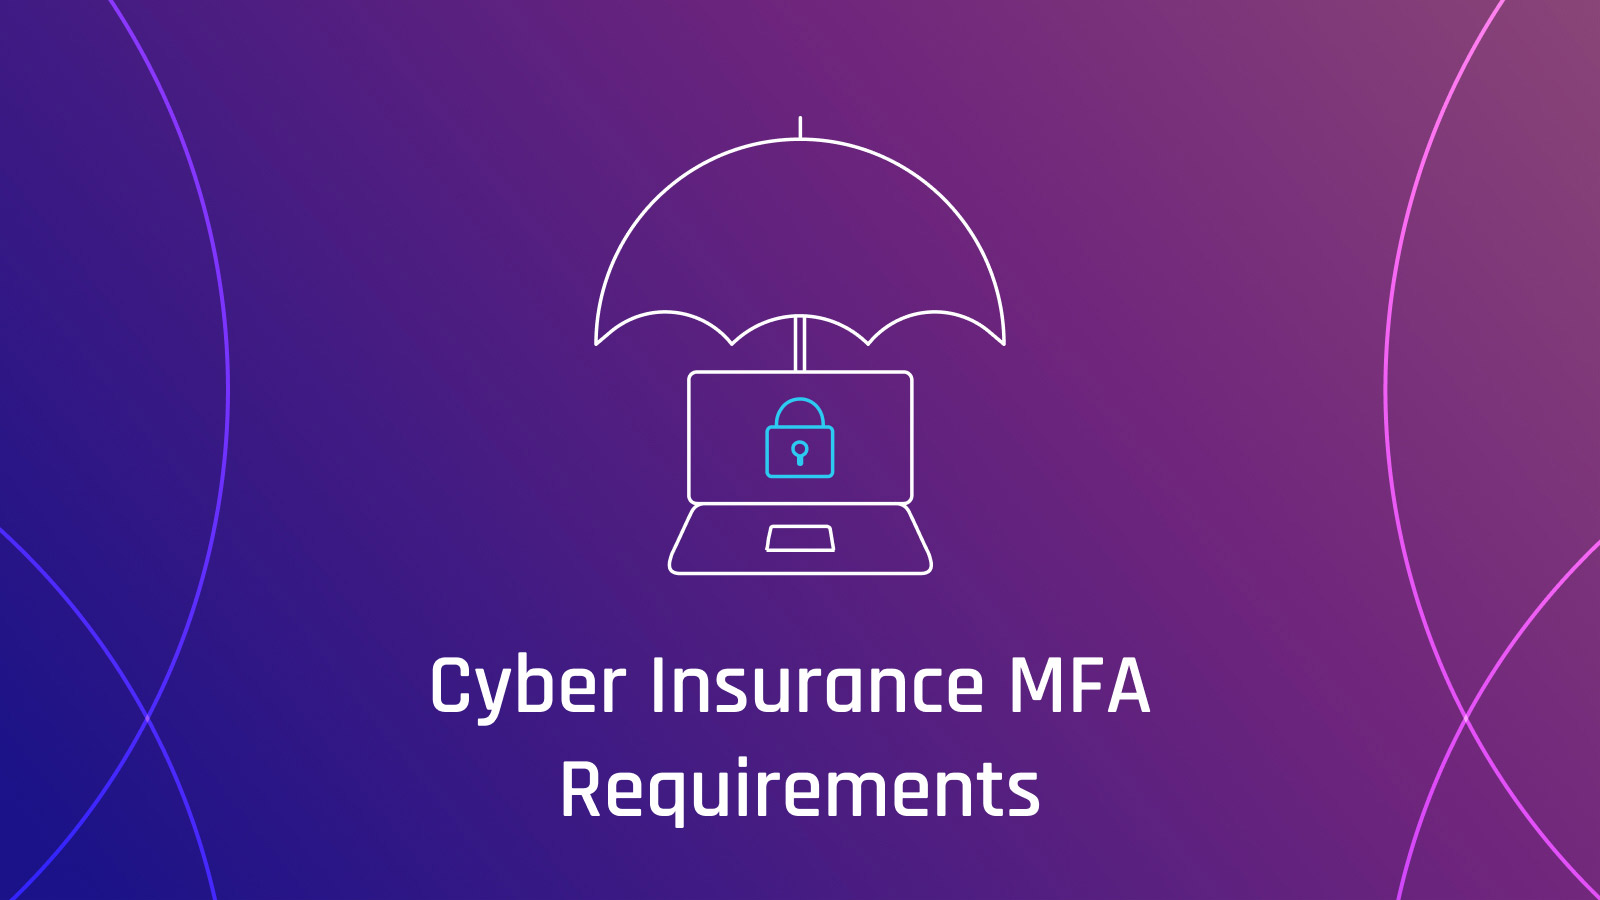 Meeting Cyber Insurance Requirements — Is MFA Enough?